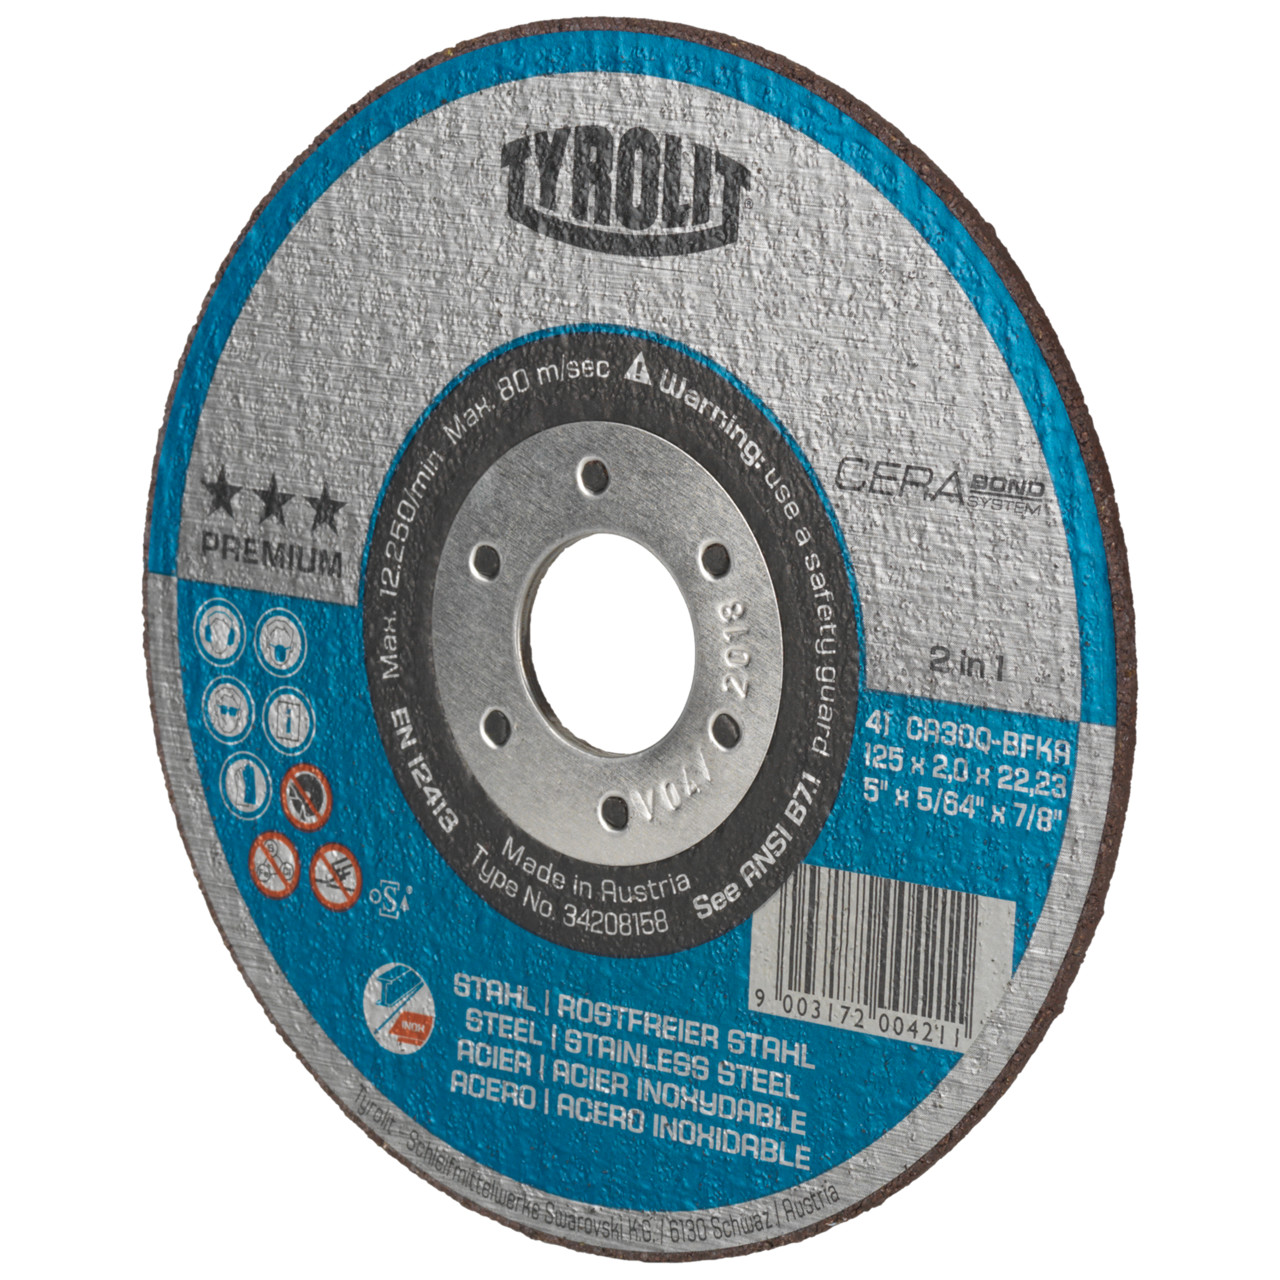 TYROLIT CERABOND Cutting disc DxDxH 125x1.6x22.23 2in1 for steel and stainless steel, shape: 41 - straight version, Art. 34256266